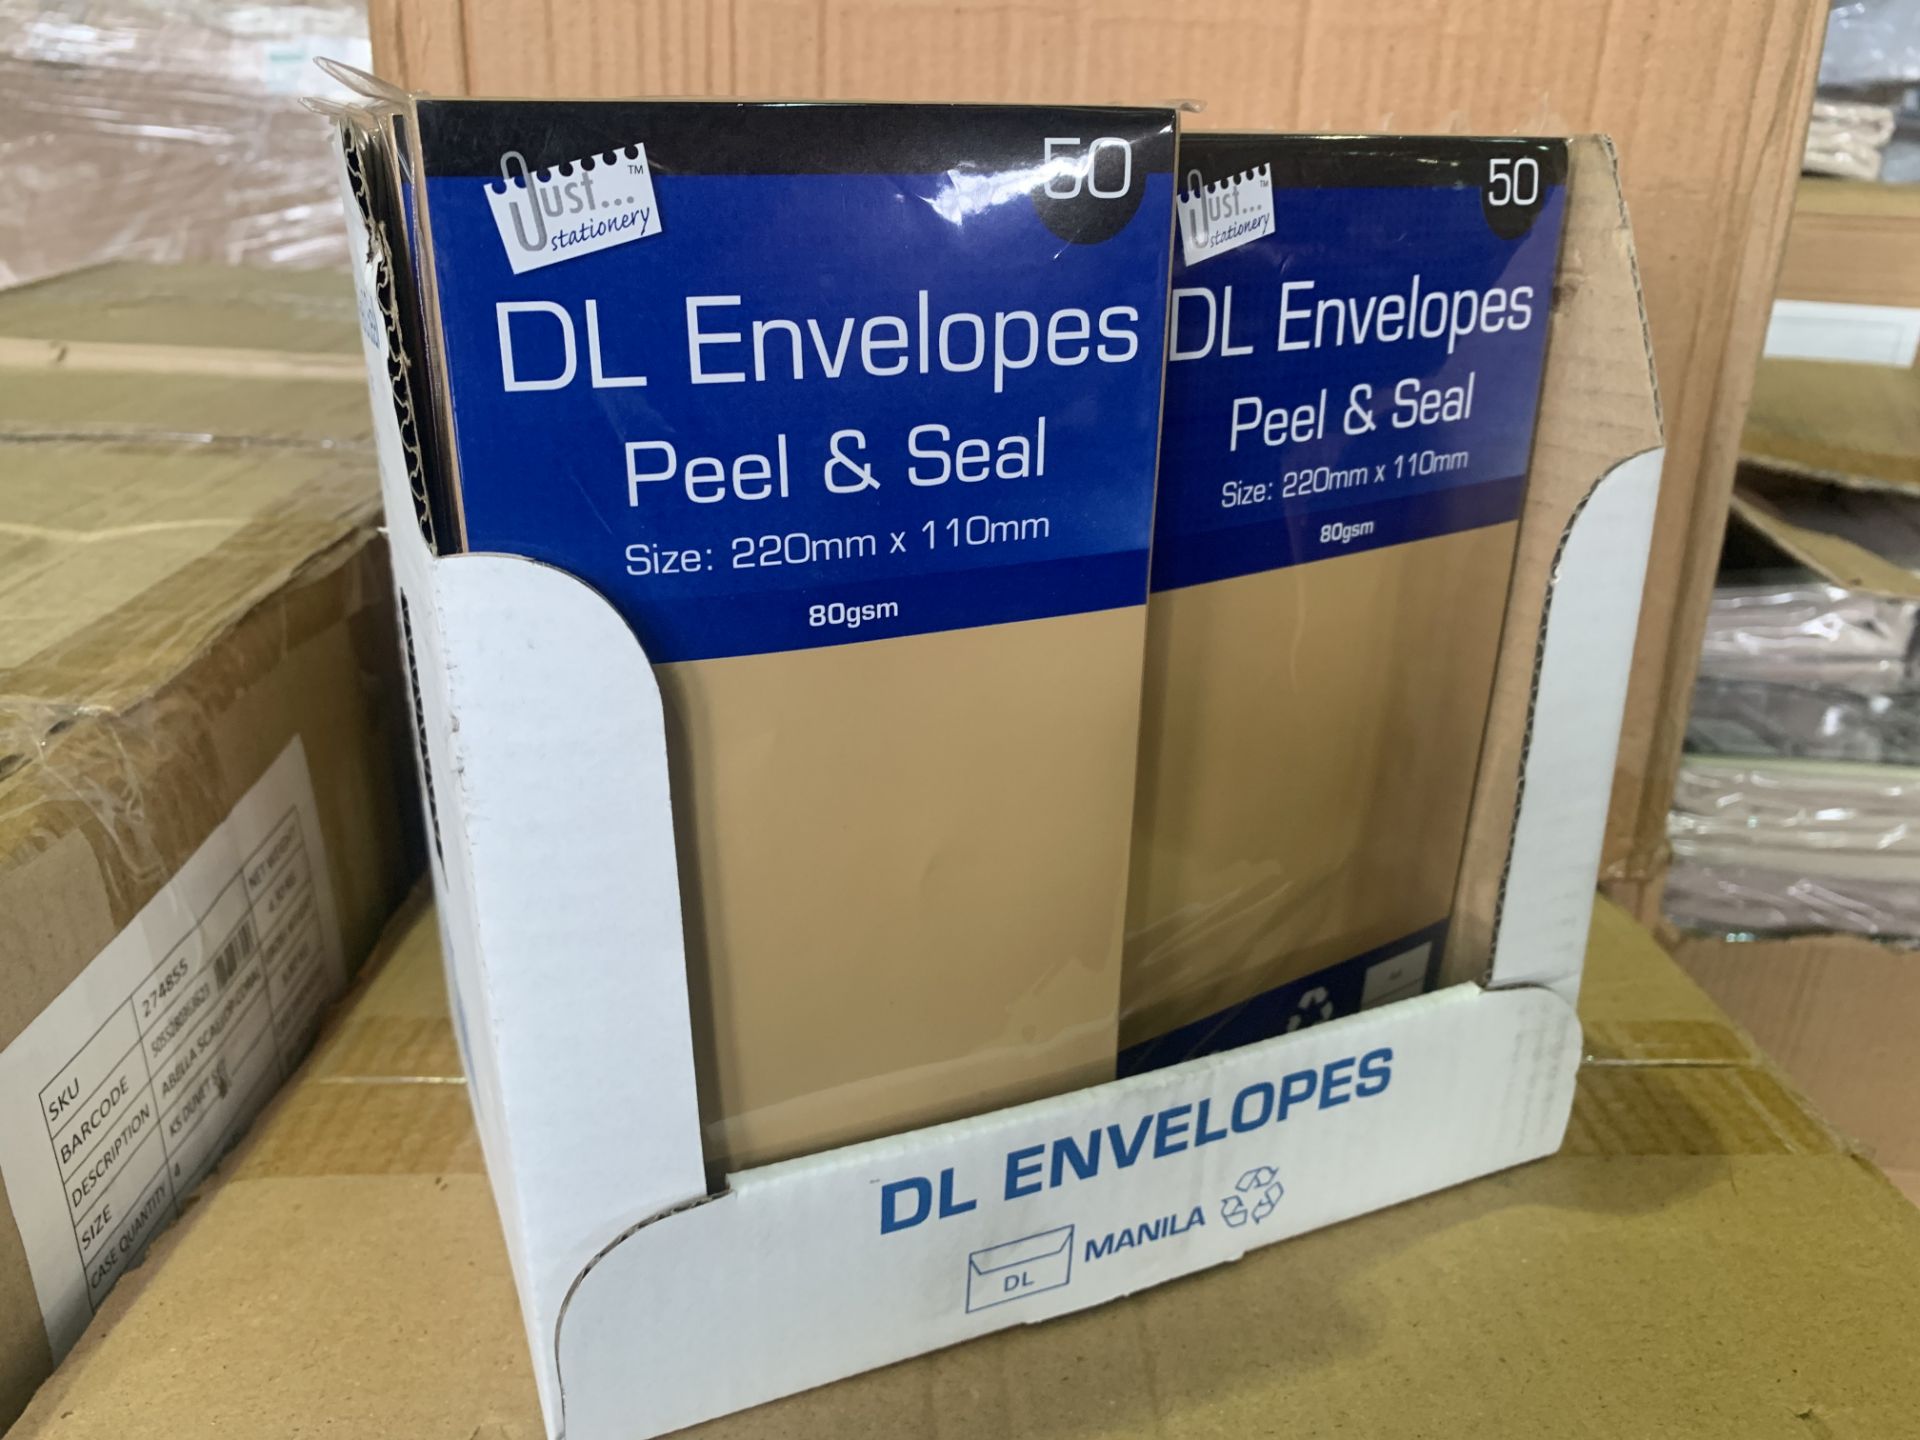 72 X BRAND NEW PACKS OF 50 DL ENVELOPES PEEL AND SEAL 220 X 110MM 80GSM